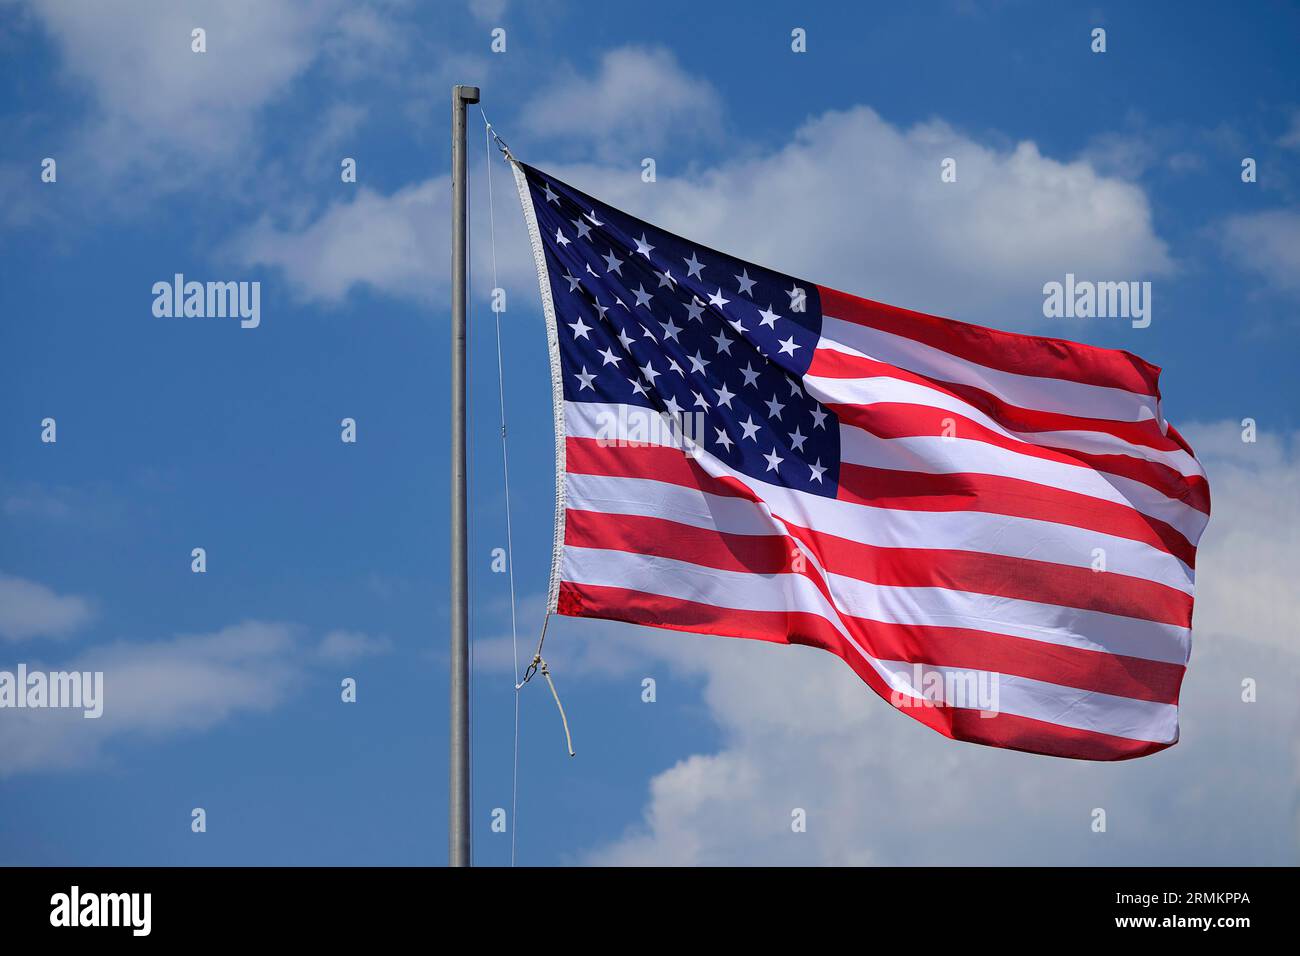 American flag waving in the wind, Bundeswehr Day, Munich, Bavaria, Germany Stock Photo